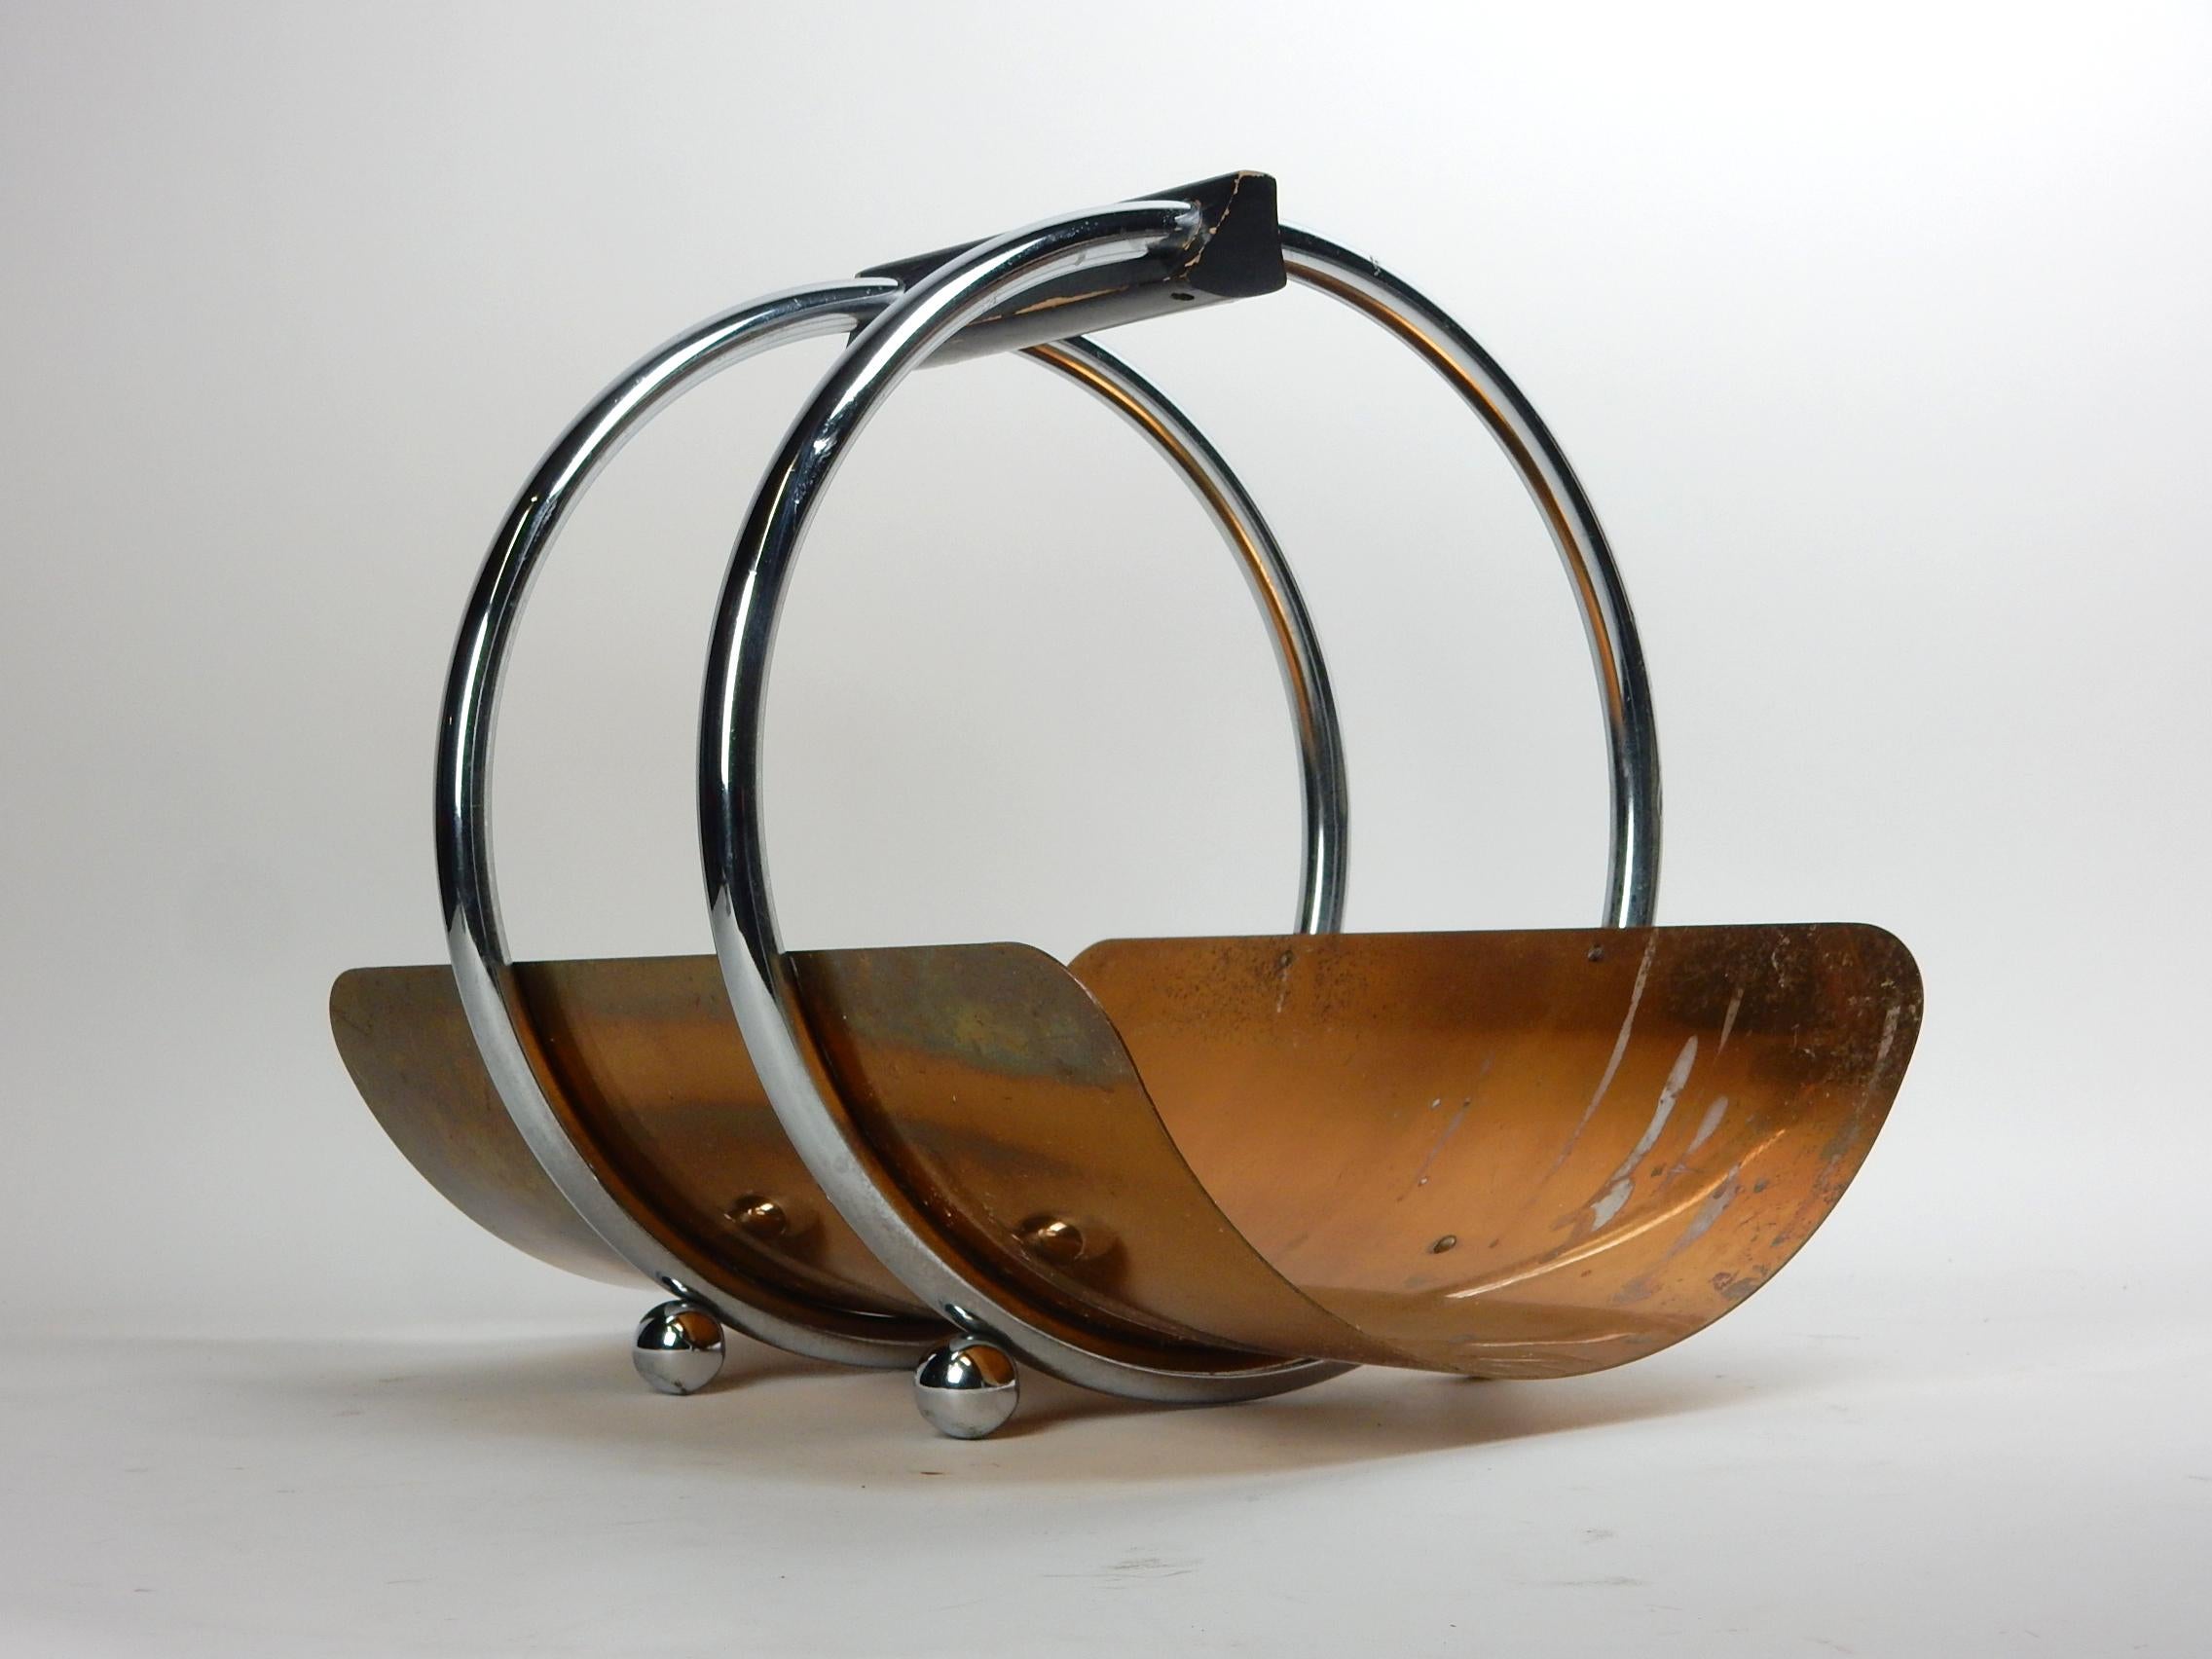 Art Deco chrome steel, copper and wood log or magazine stand
designed by Leslie Beaton for Revere, circa 1935.
Large wooden handle connects 2 large hoops with ball feet. Floating curved copper tray.
Solid, complete original condition.